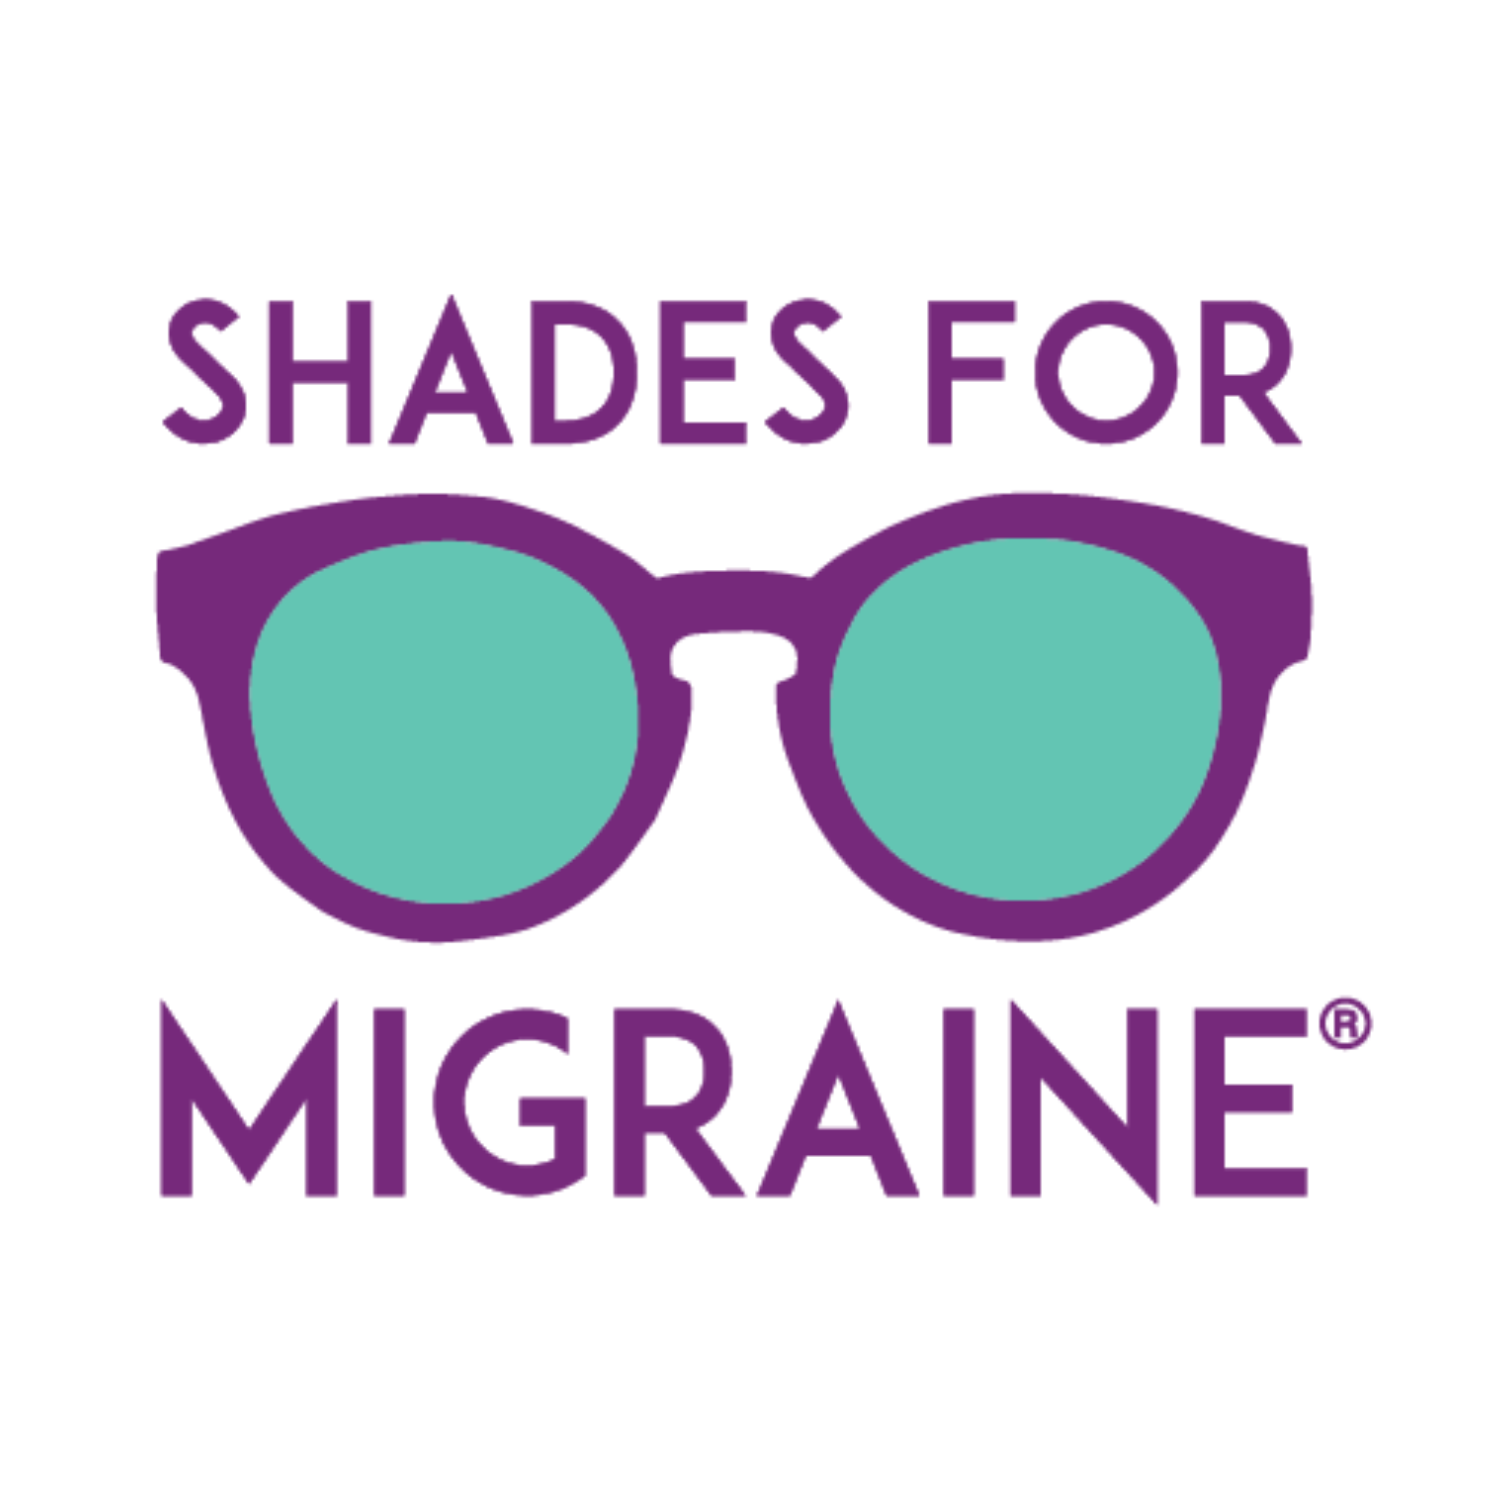 Shades for Migraine